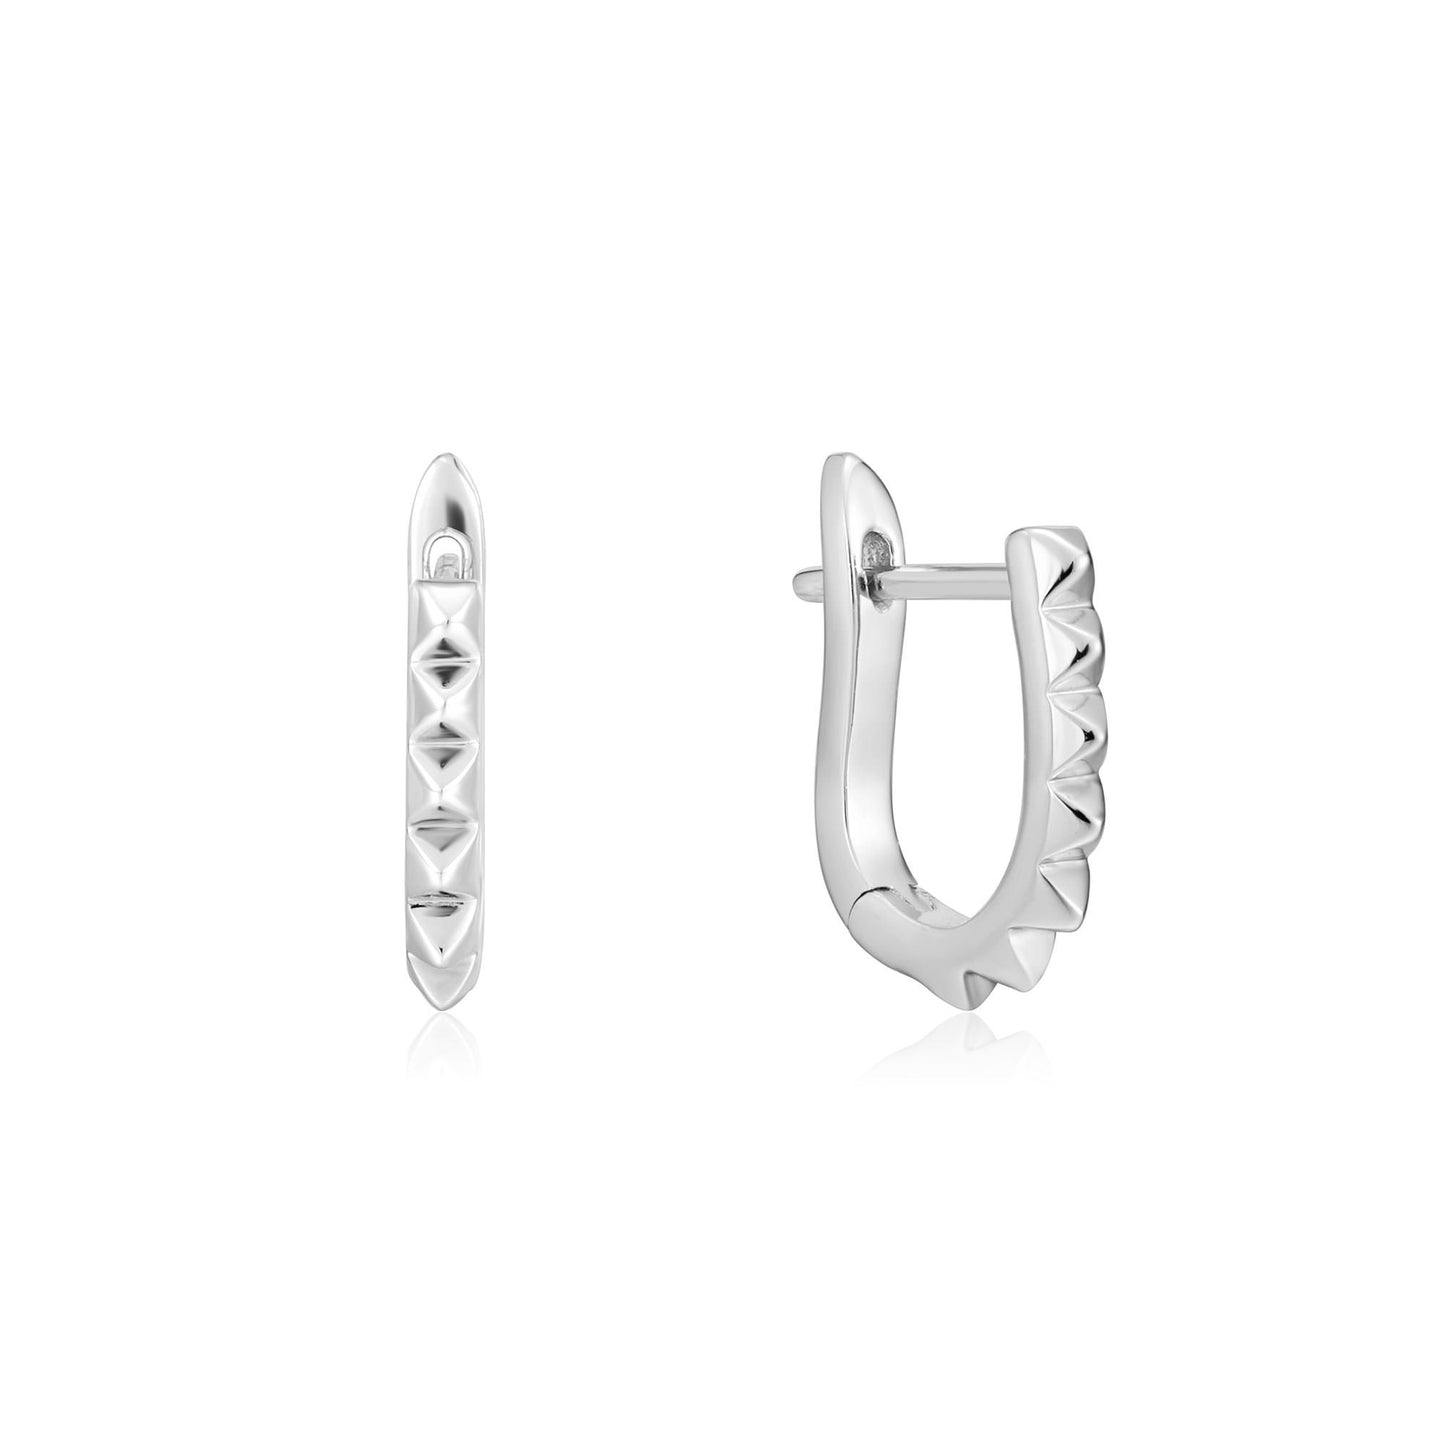 ANIA HAIE ANIA HAIE - Silver Spike Huggie Hoop Earrings available at The Good Life Boutique